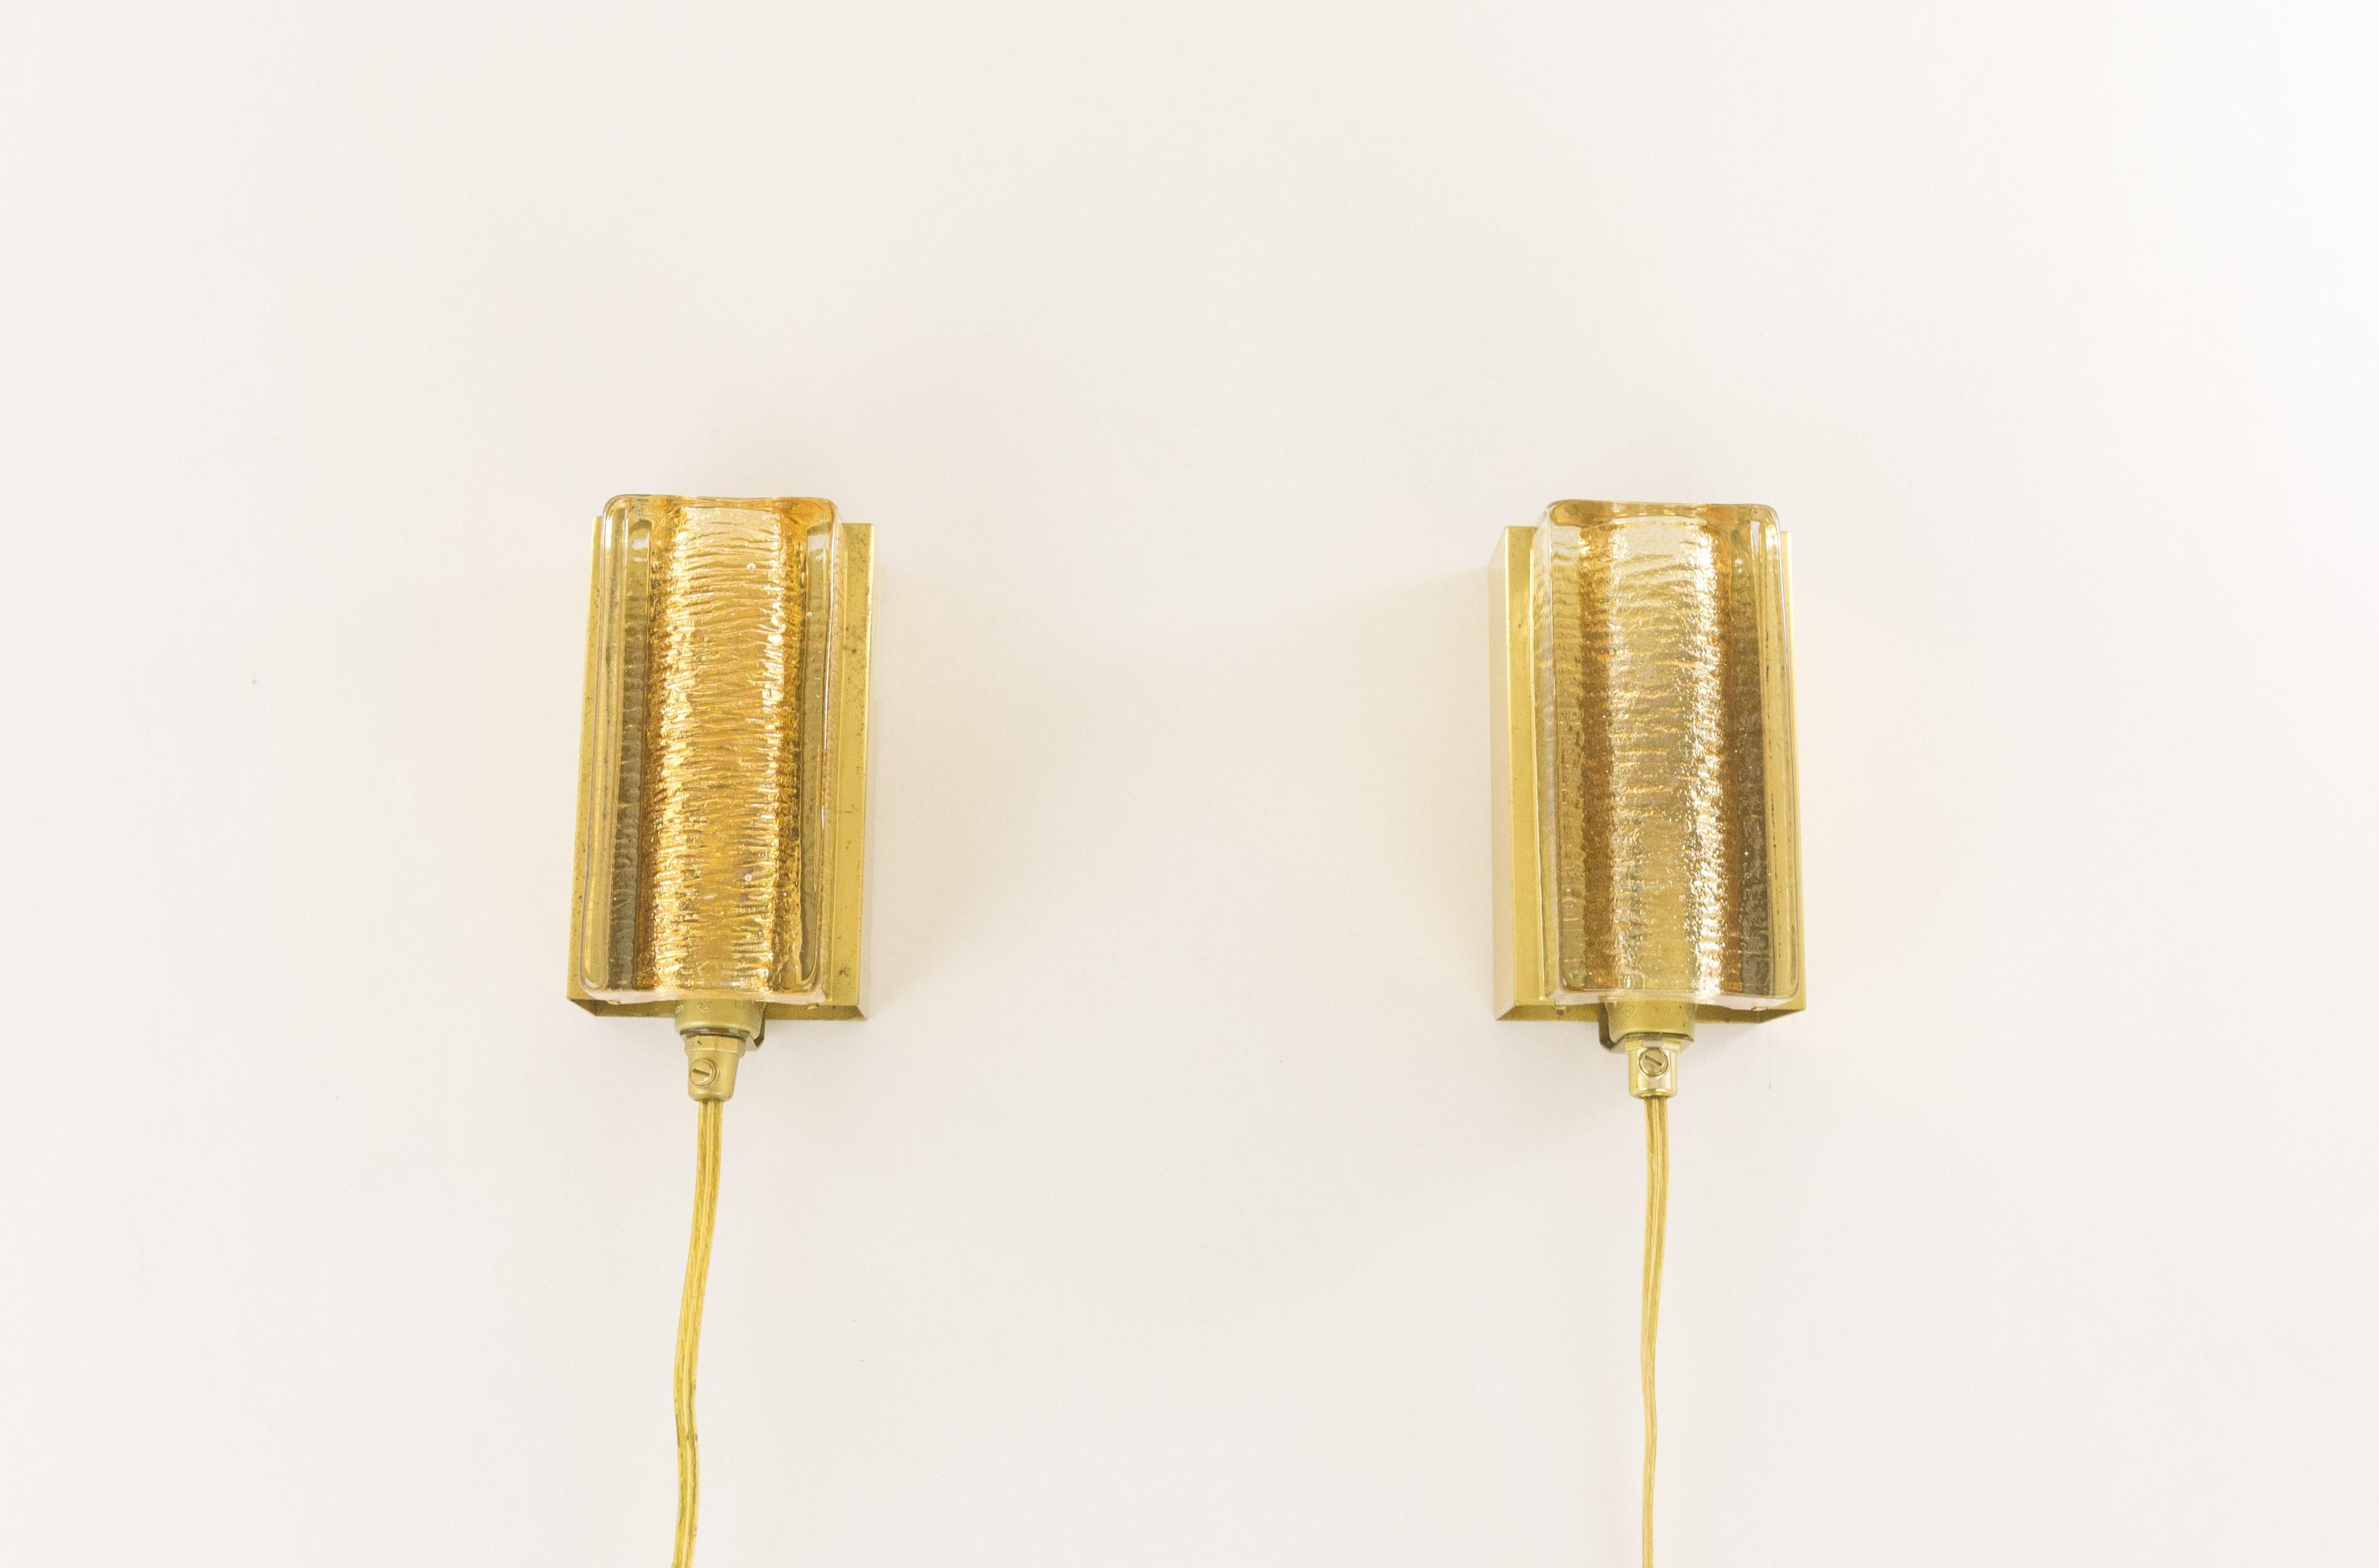 Scandinavian Modern Pair of Atlantic Wall Lamps by Vitrika in Gold, 1970s For Sale